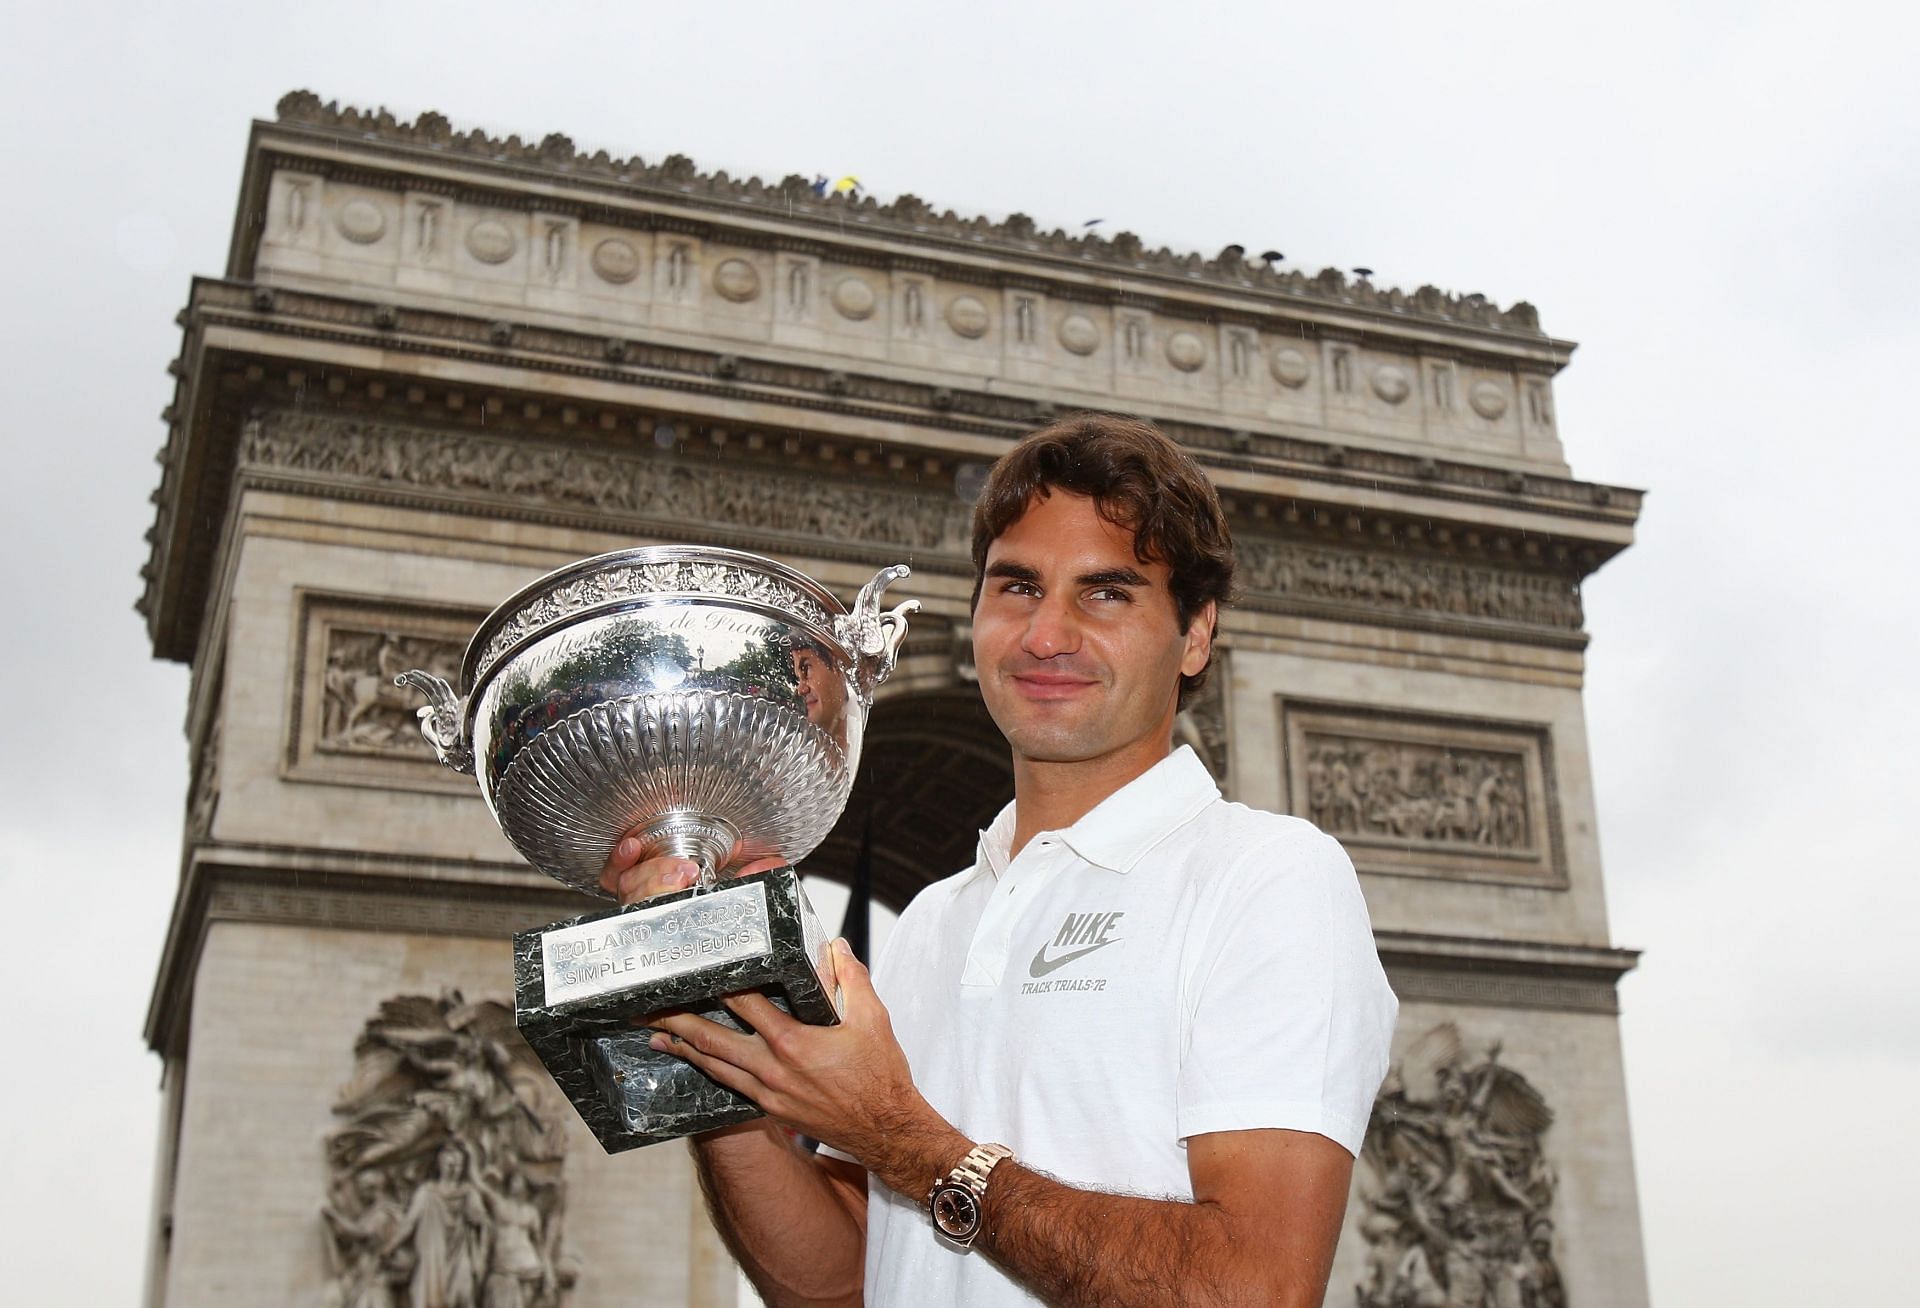 Roger Federer has won one final at the French Open, while losing four